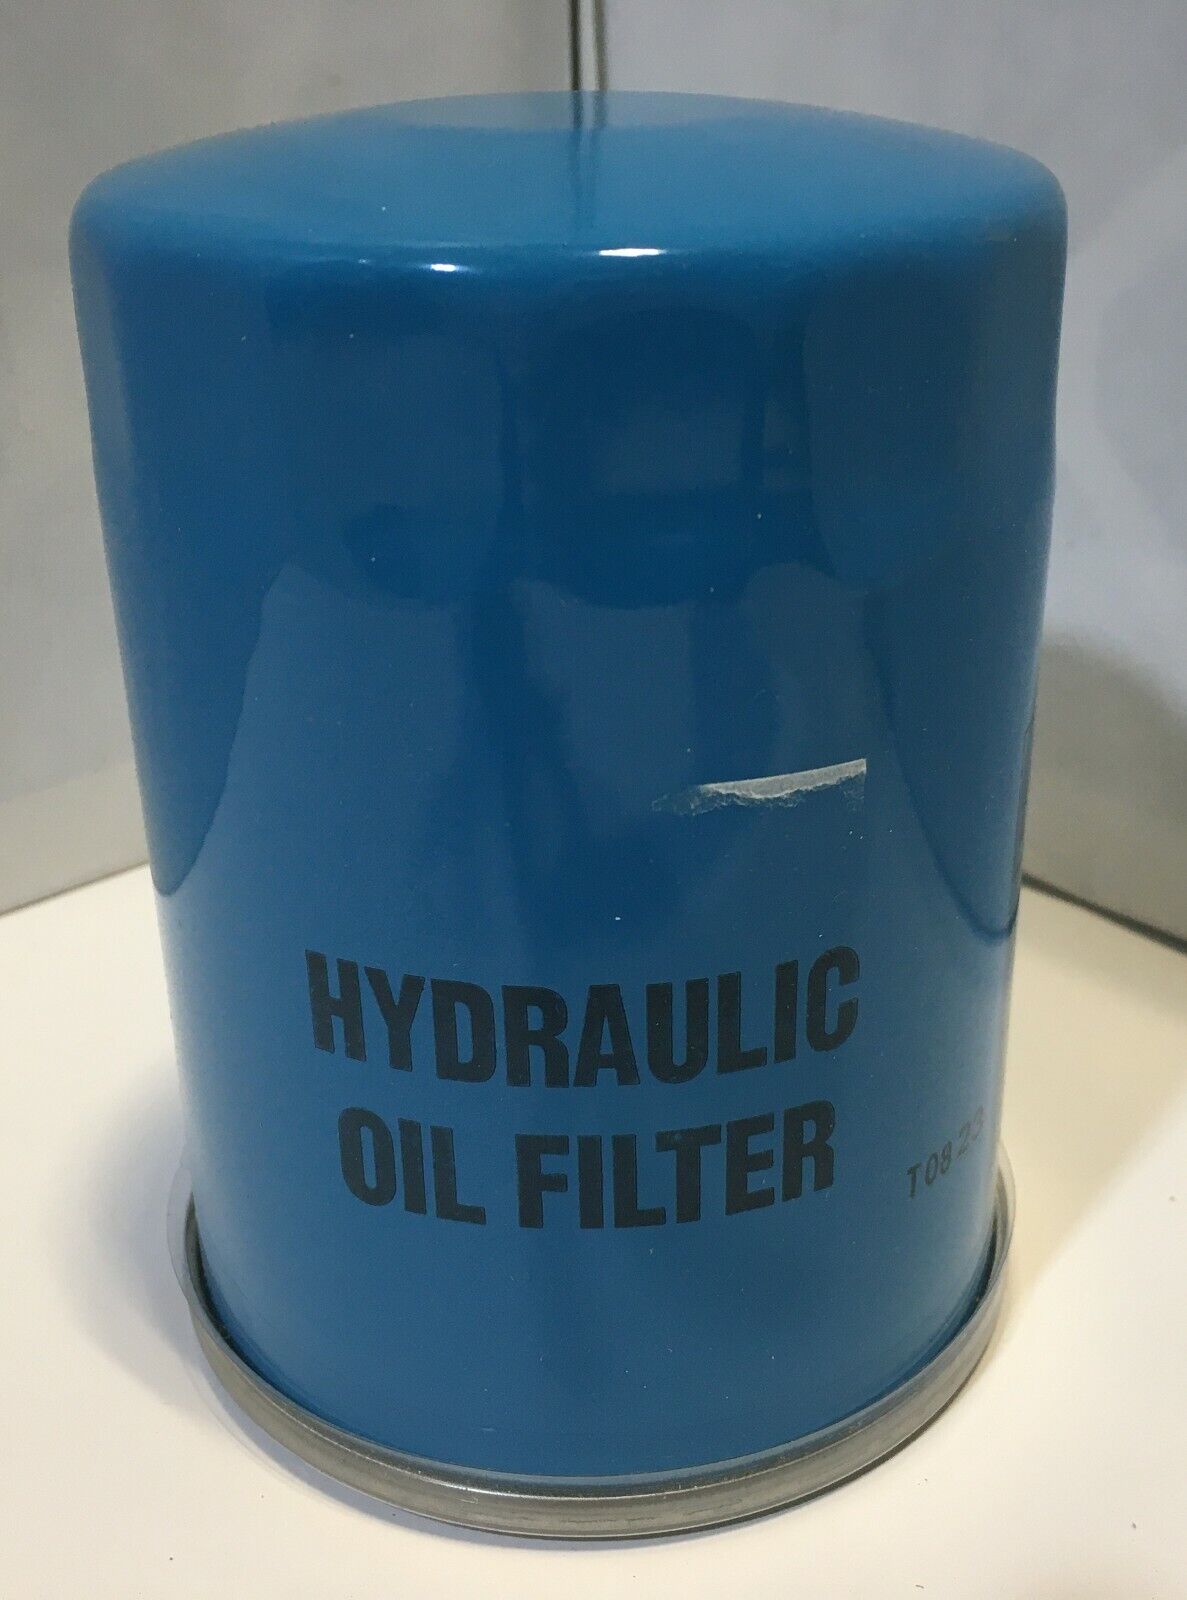 CNH - Hydraulic Oil Filter - #S15510-20200 / #77267166 - 3 Filters in lot CNH S15510-20200 - фотография #2